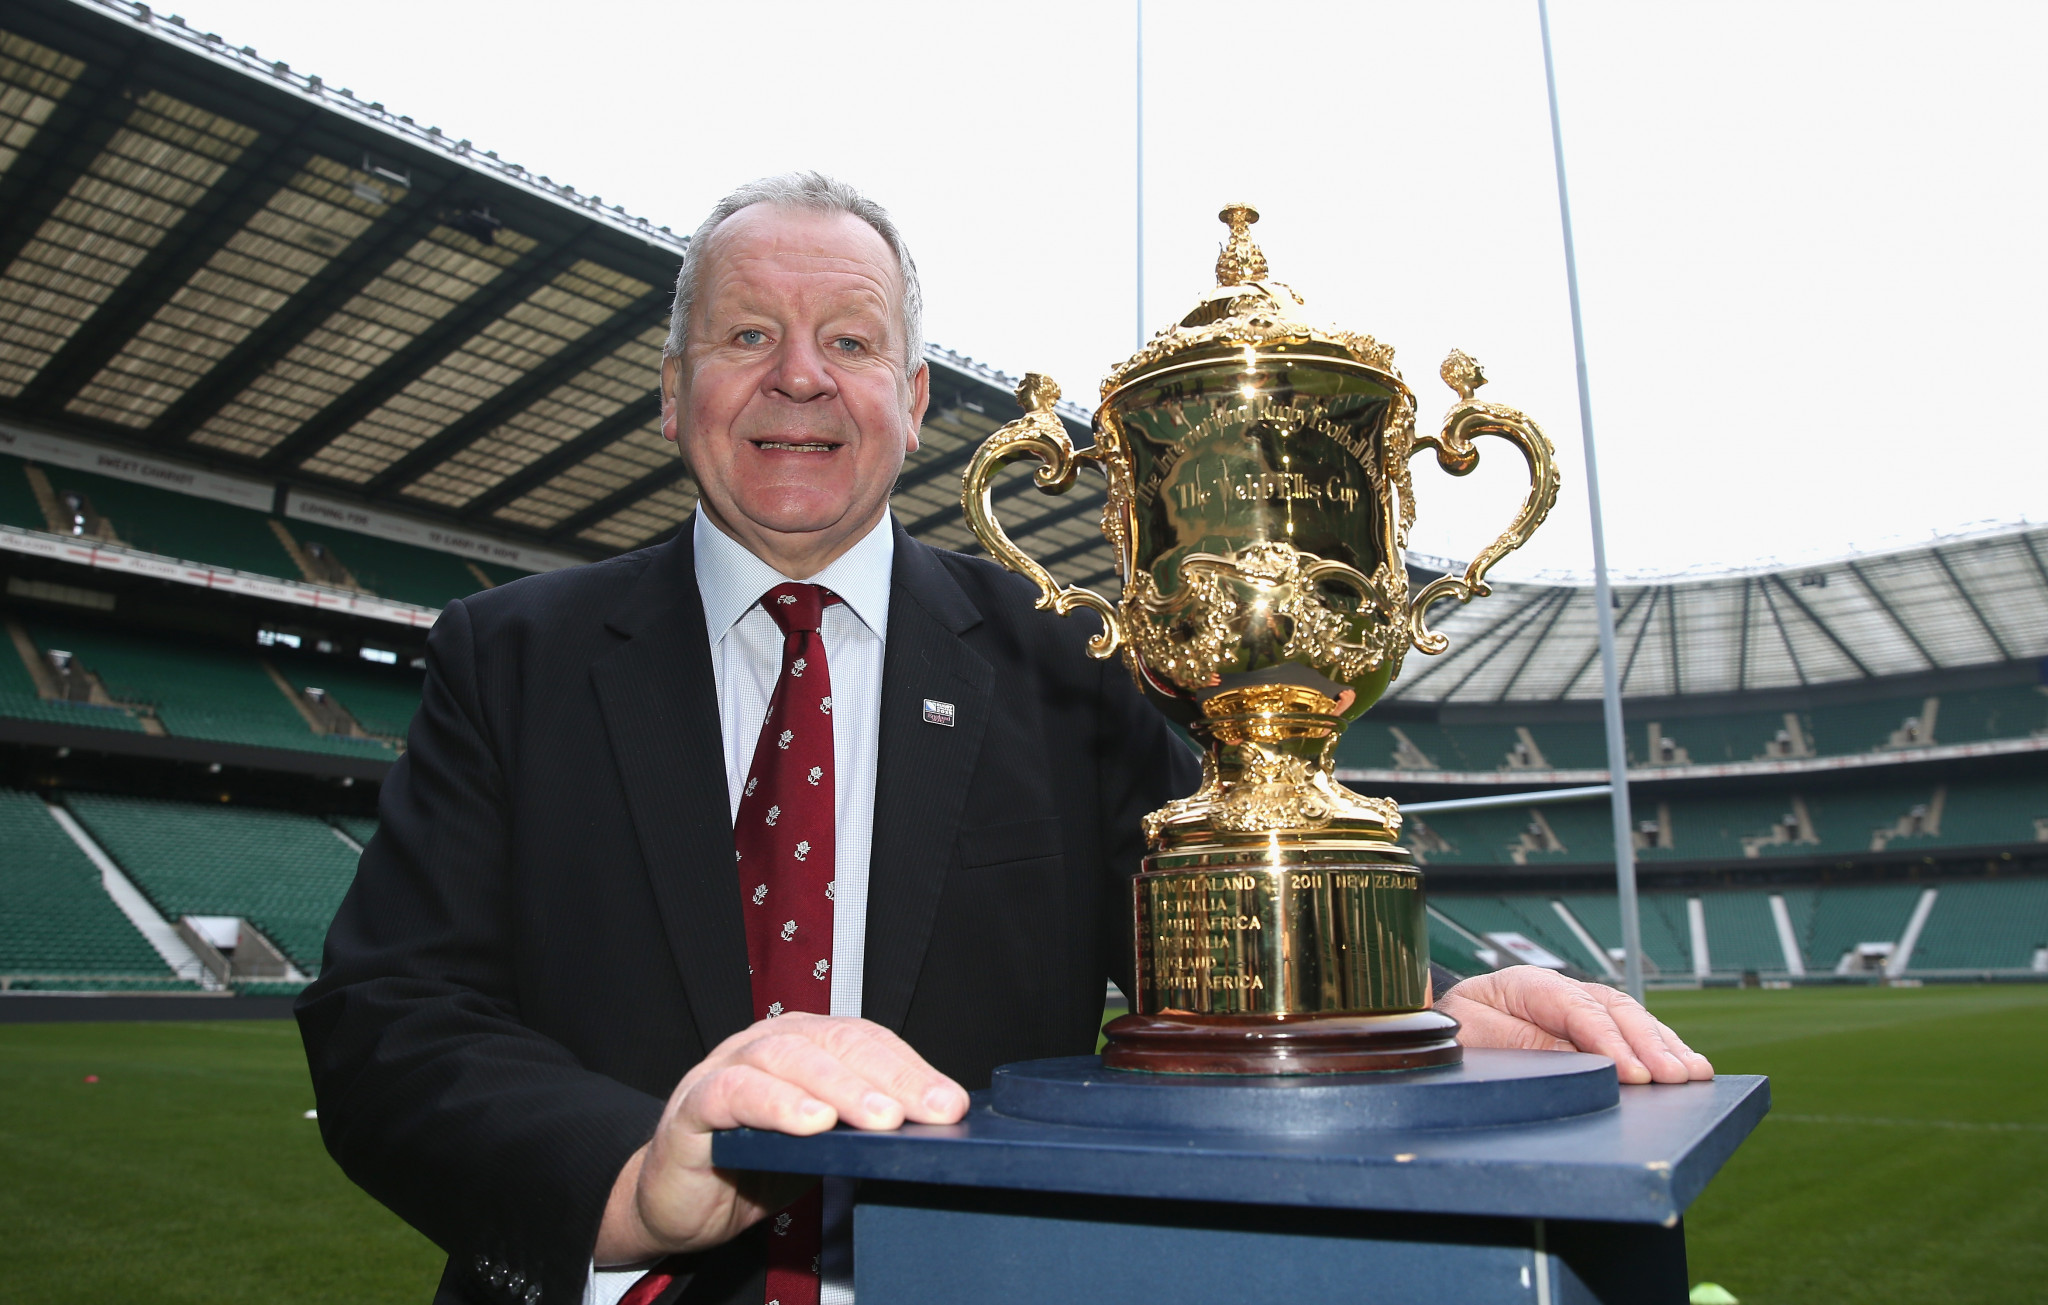 World Rugby chairman Bill Beaumont has dismissed criticism of their decision to recommend South Africa as host of the 2023 World Cup as just 